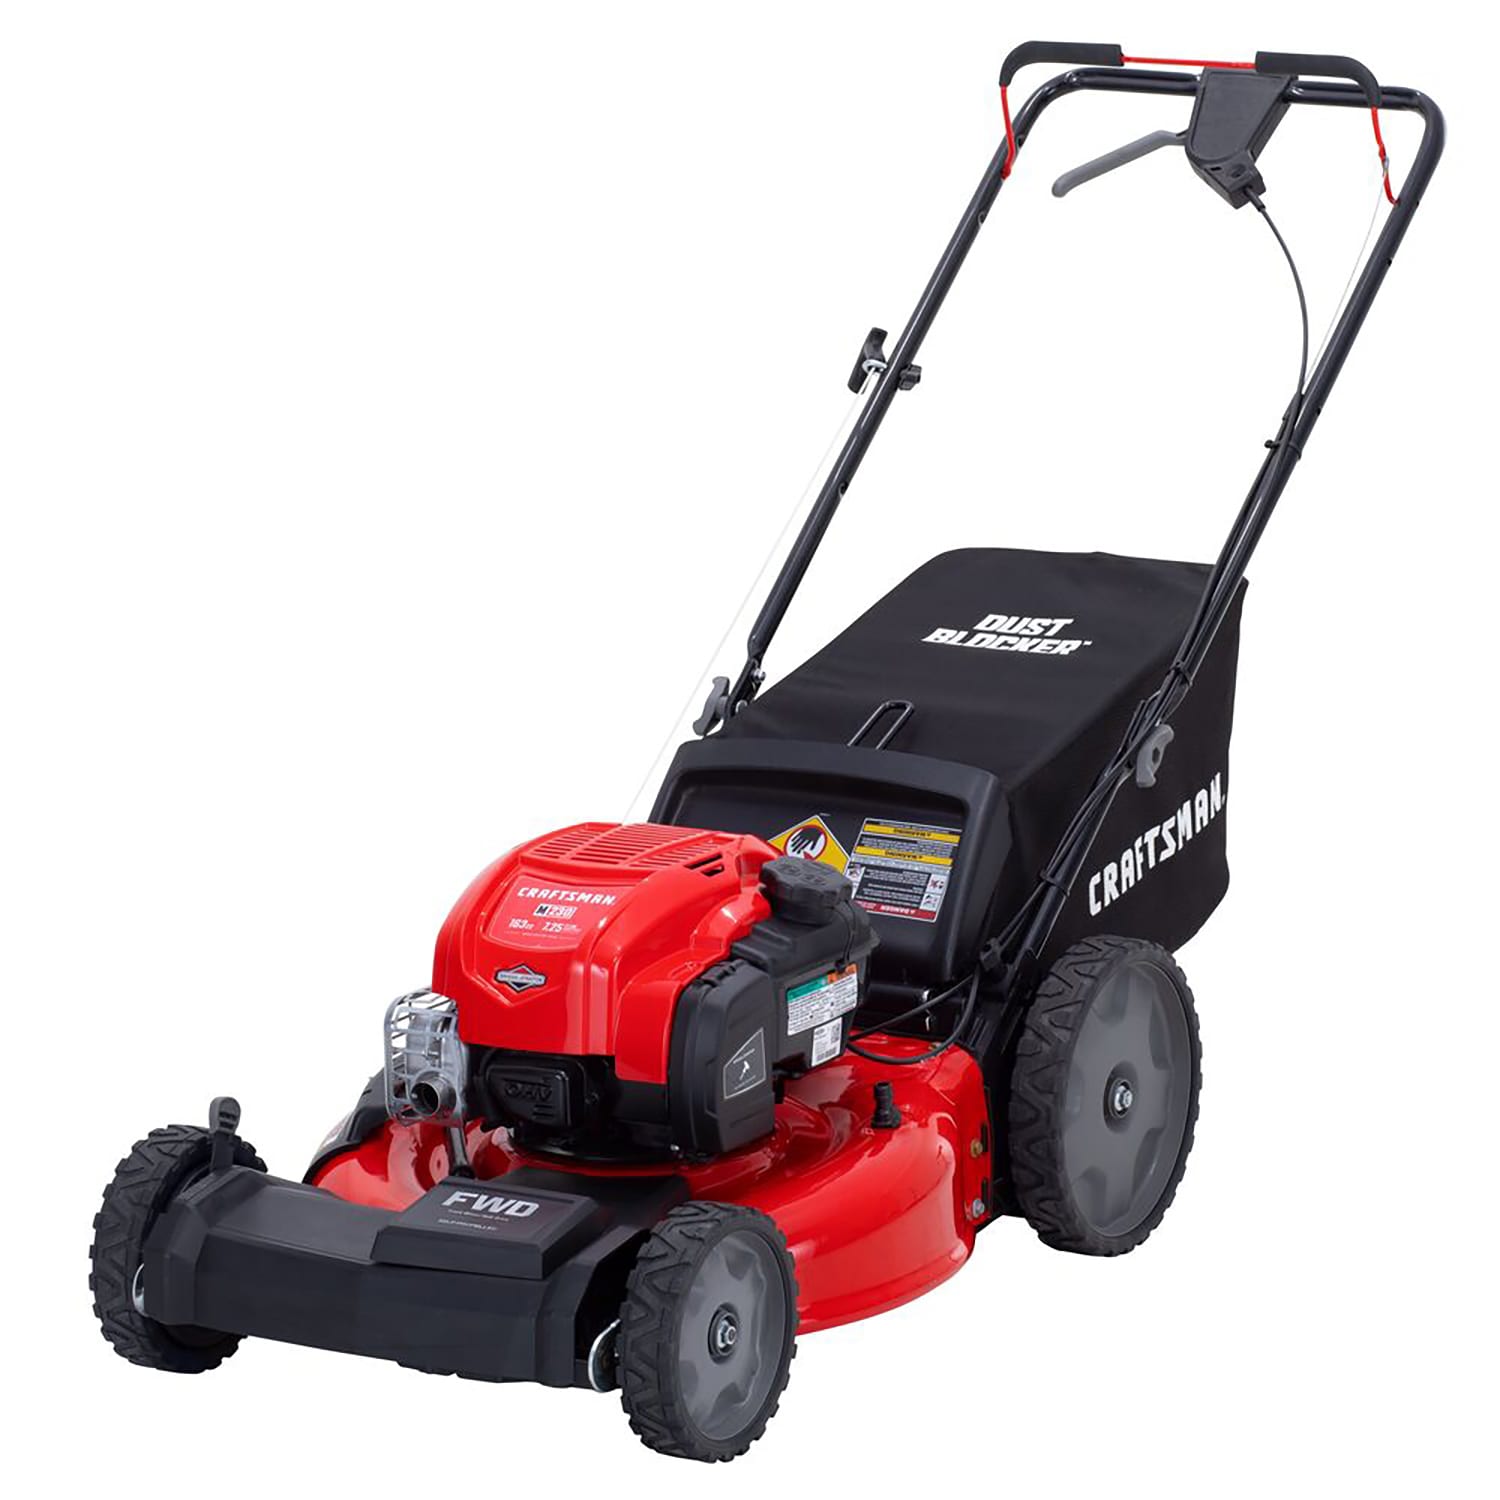 CRAFTSMAN M230 21-in Gas Self-propelled Lawn Mower with 163-cc Briggs and  Stratton Engine